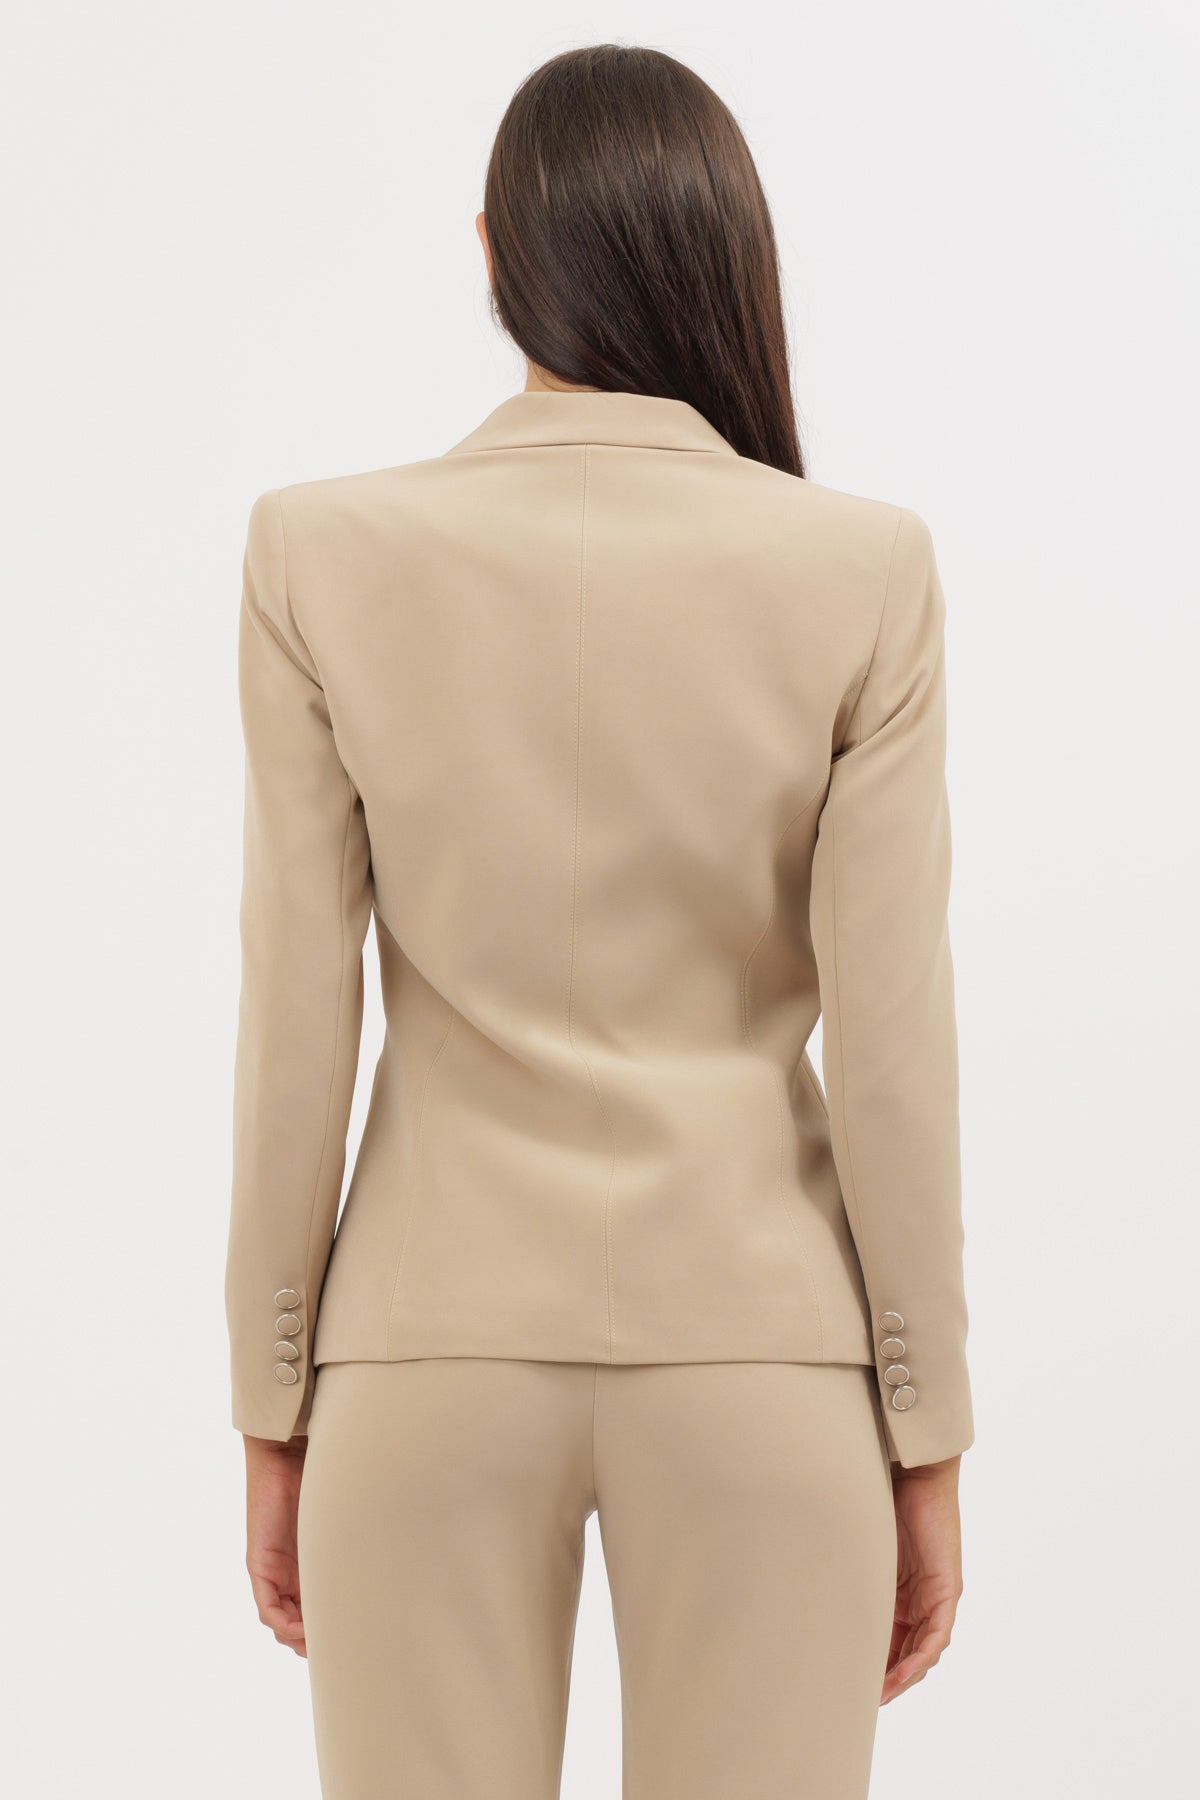 Cassiopea Jacket Beige